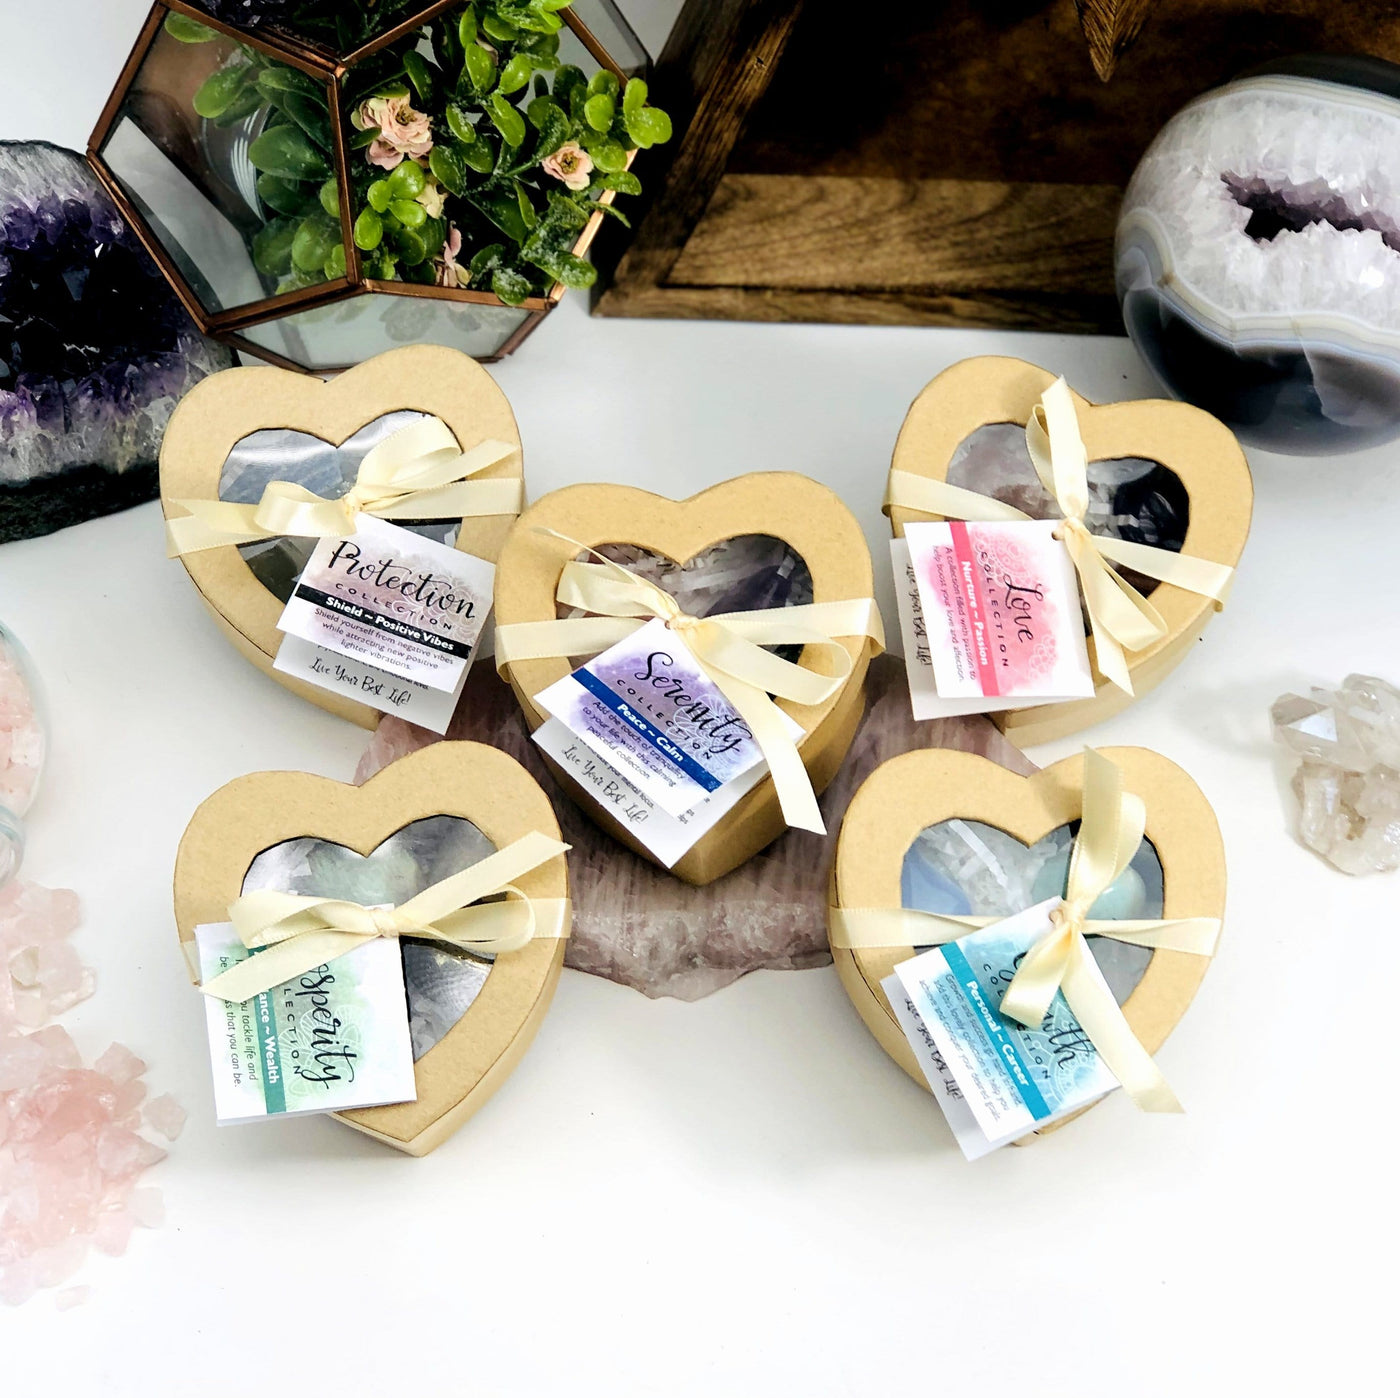 Crystal Healing Love Set of Stones in Heart Shaped Boxes on a table